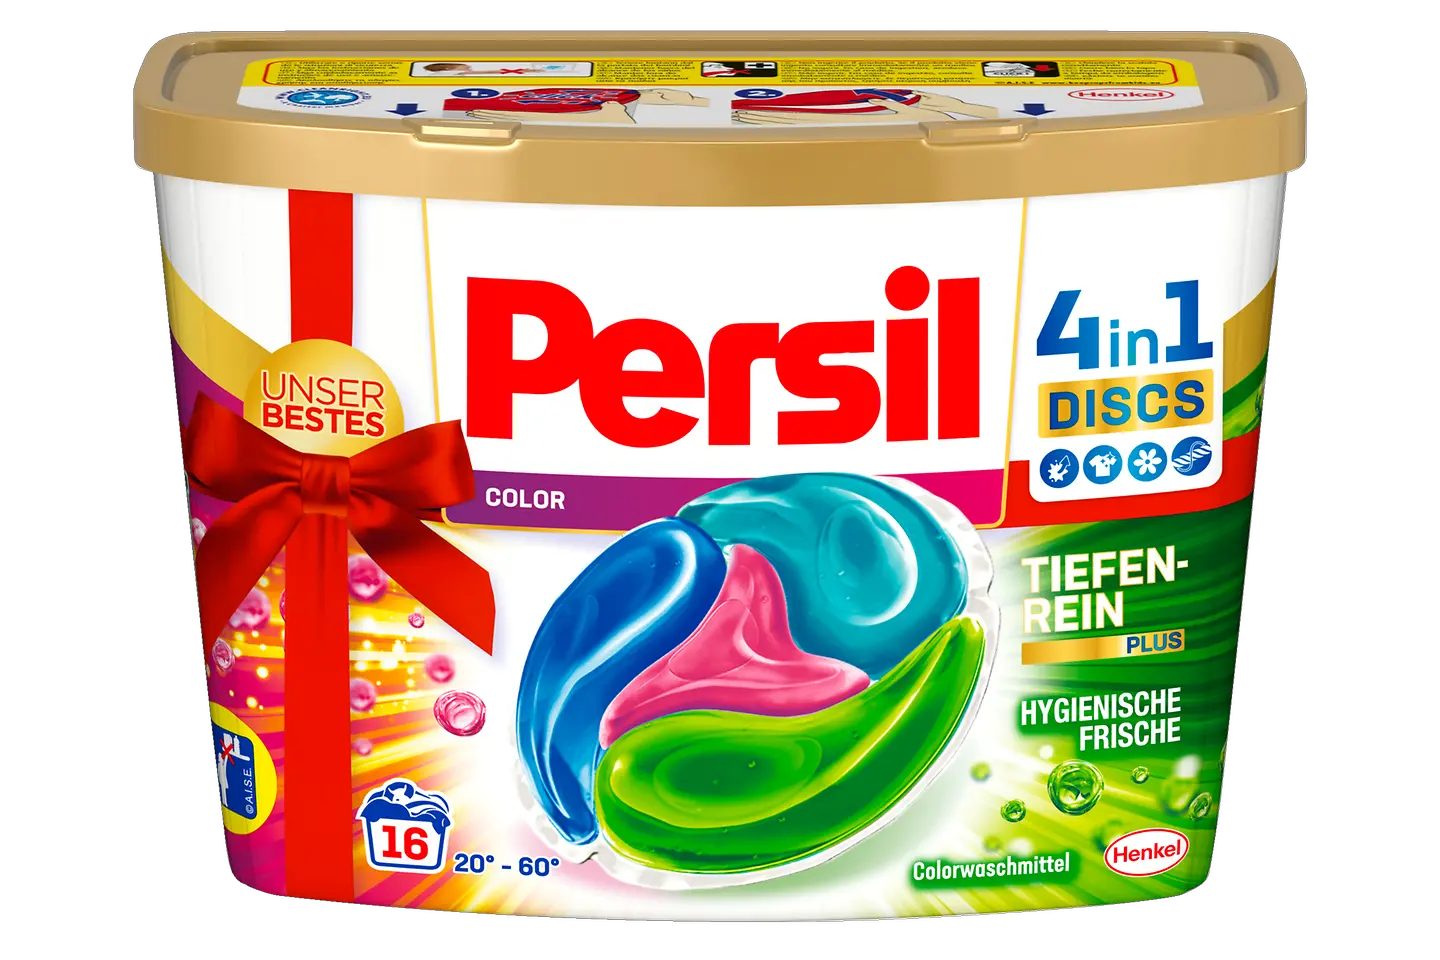 Persil Color 4in1 Discs „Unser Bestes“ mit roter Schleife 